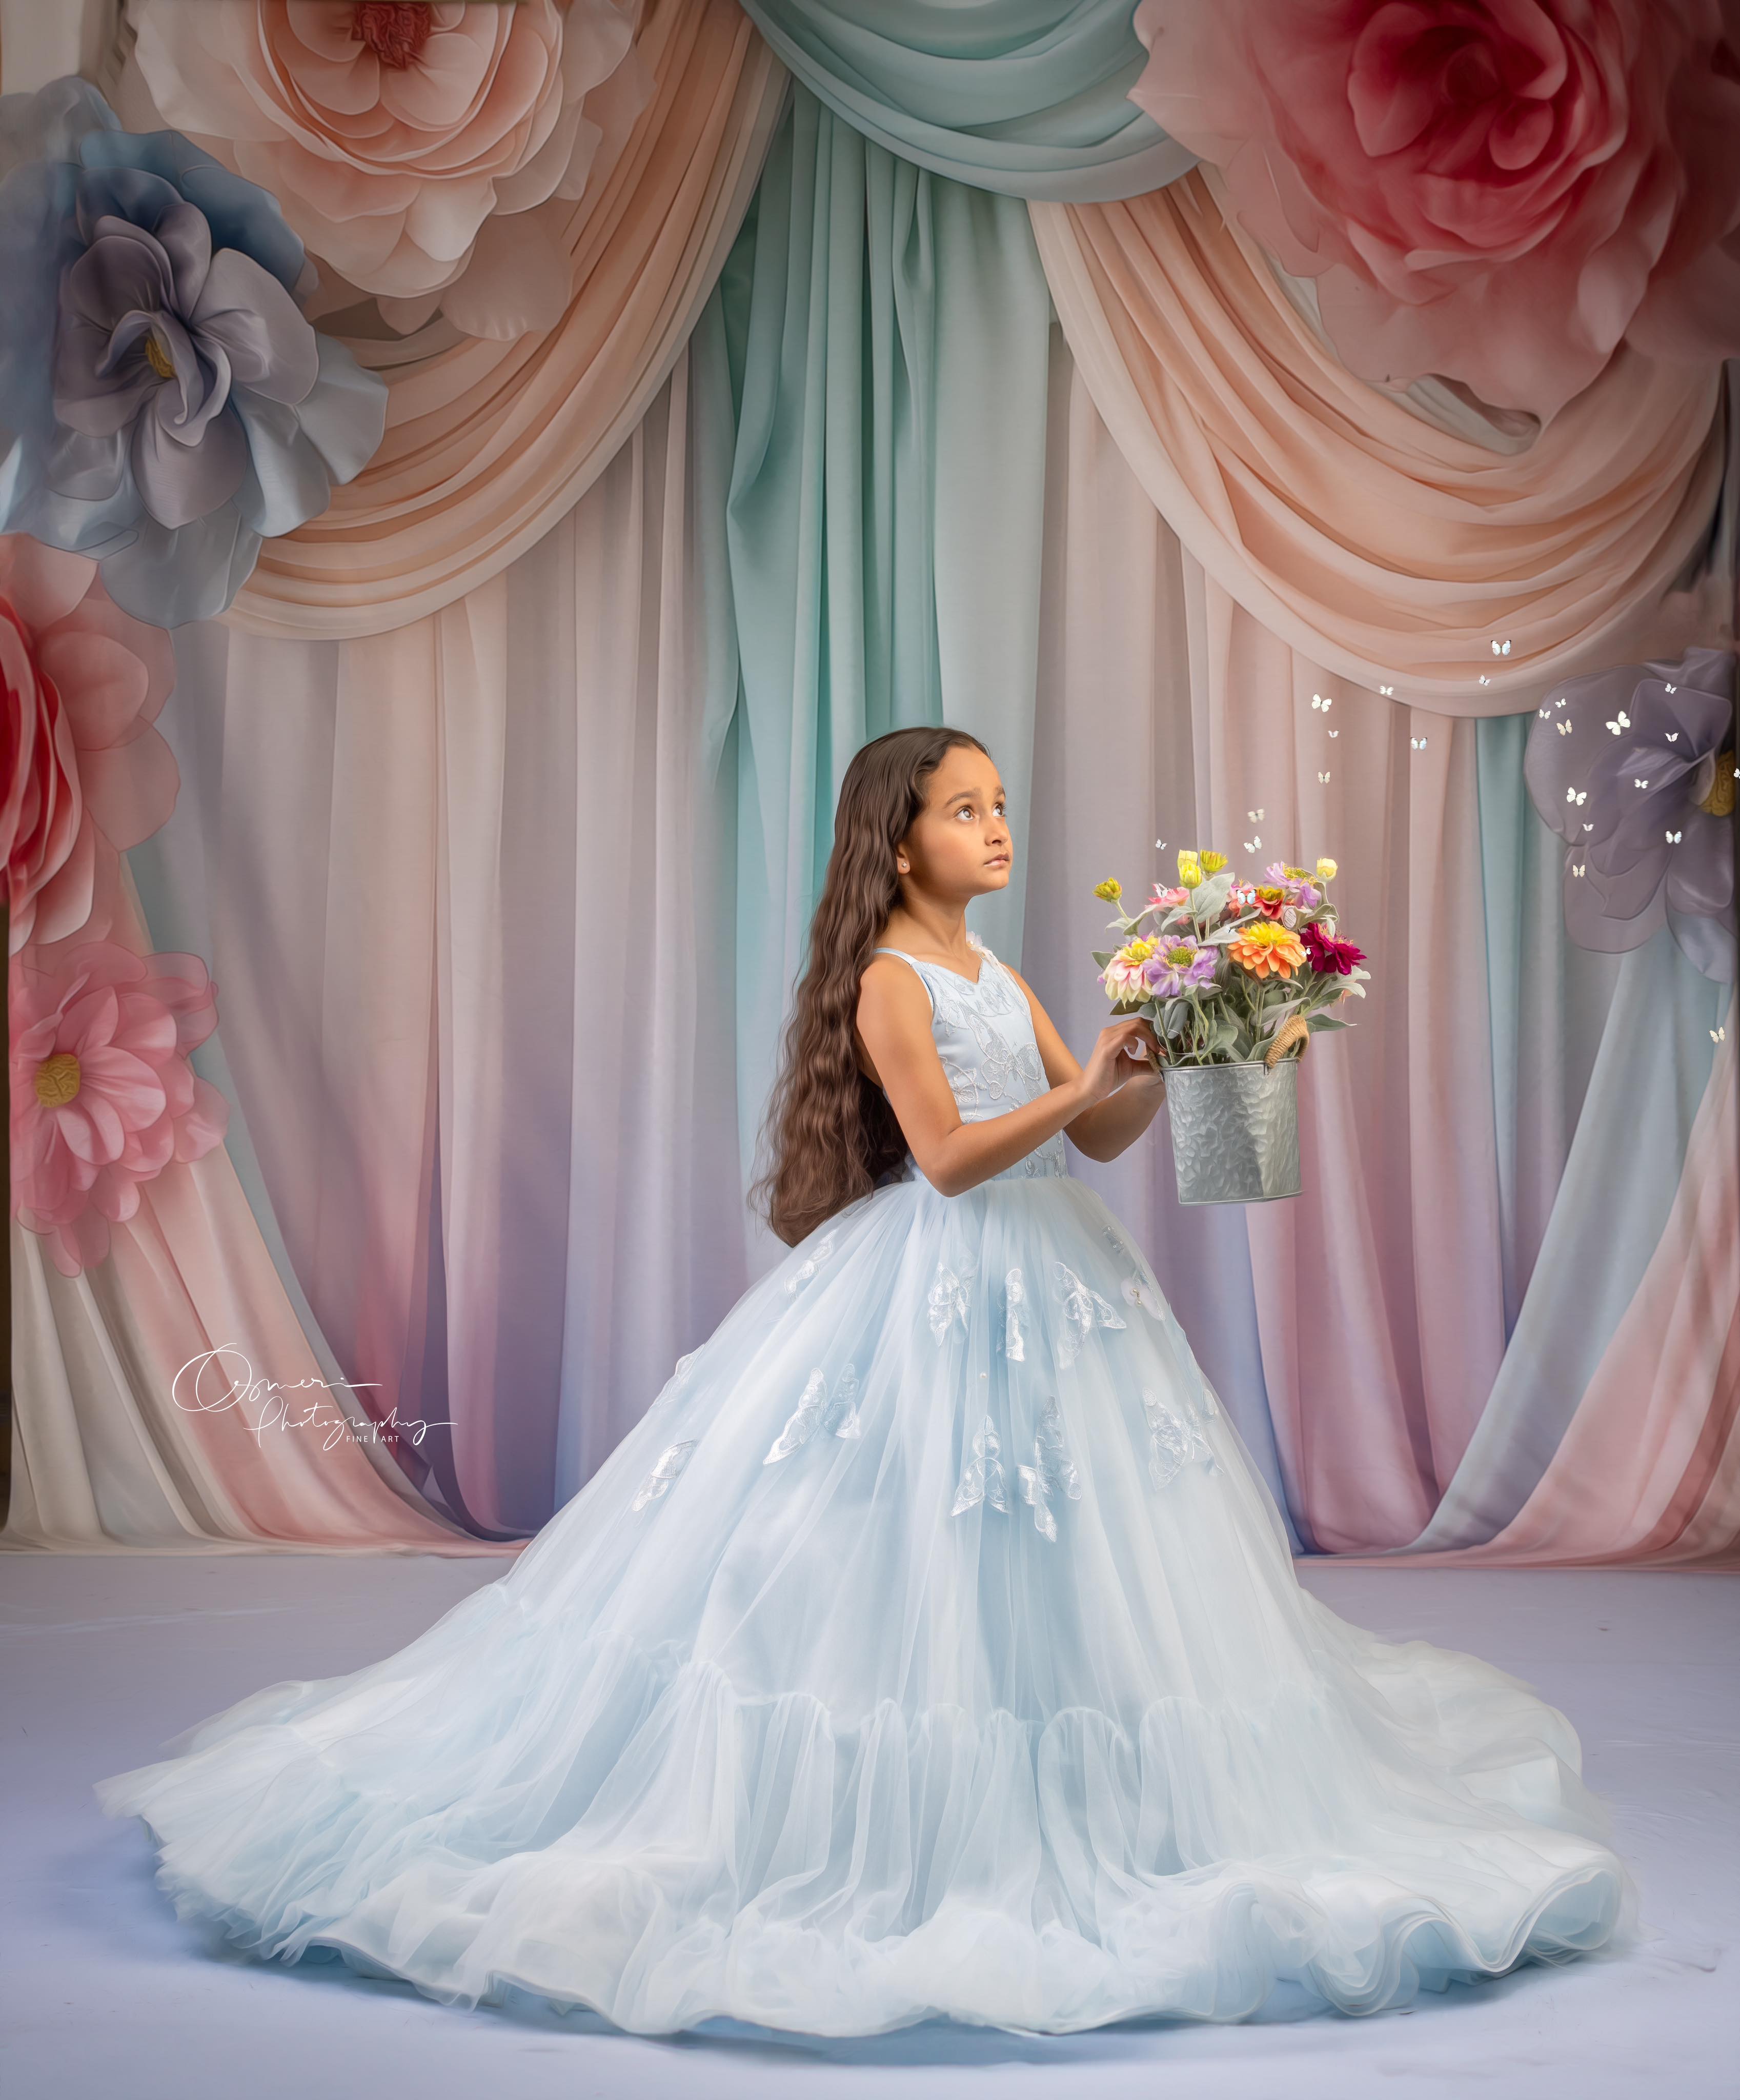 Couture gowns and photography backdrops